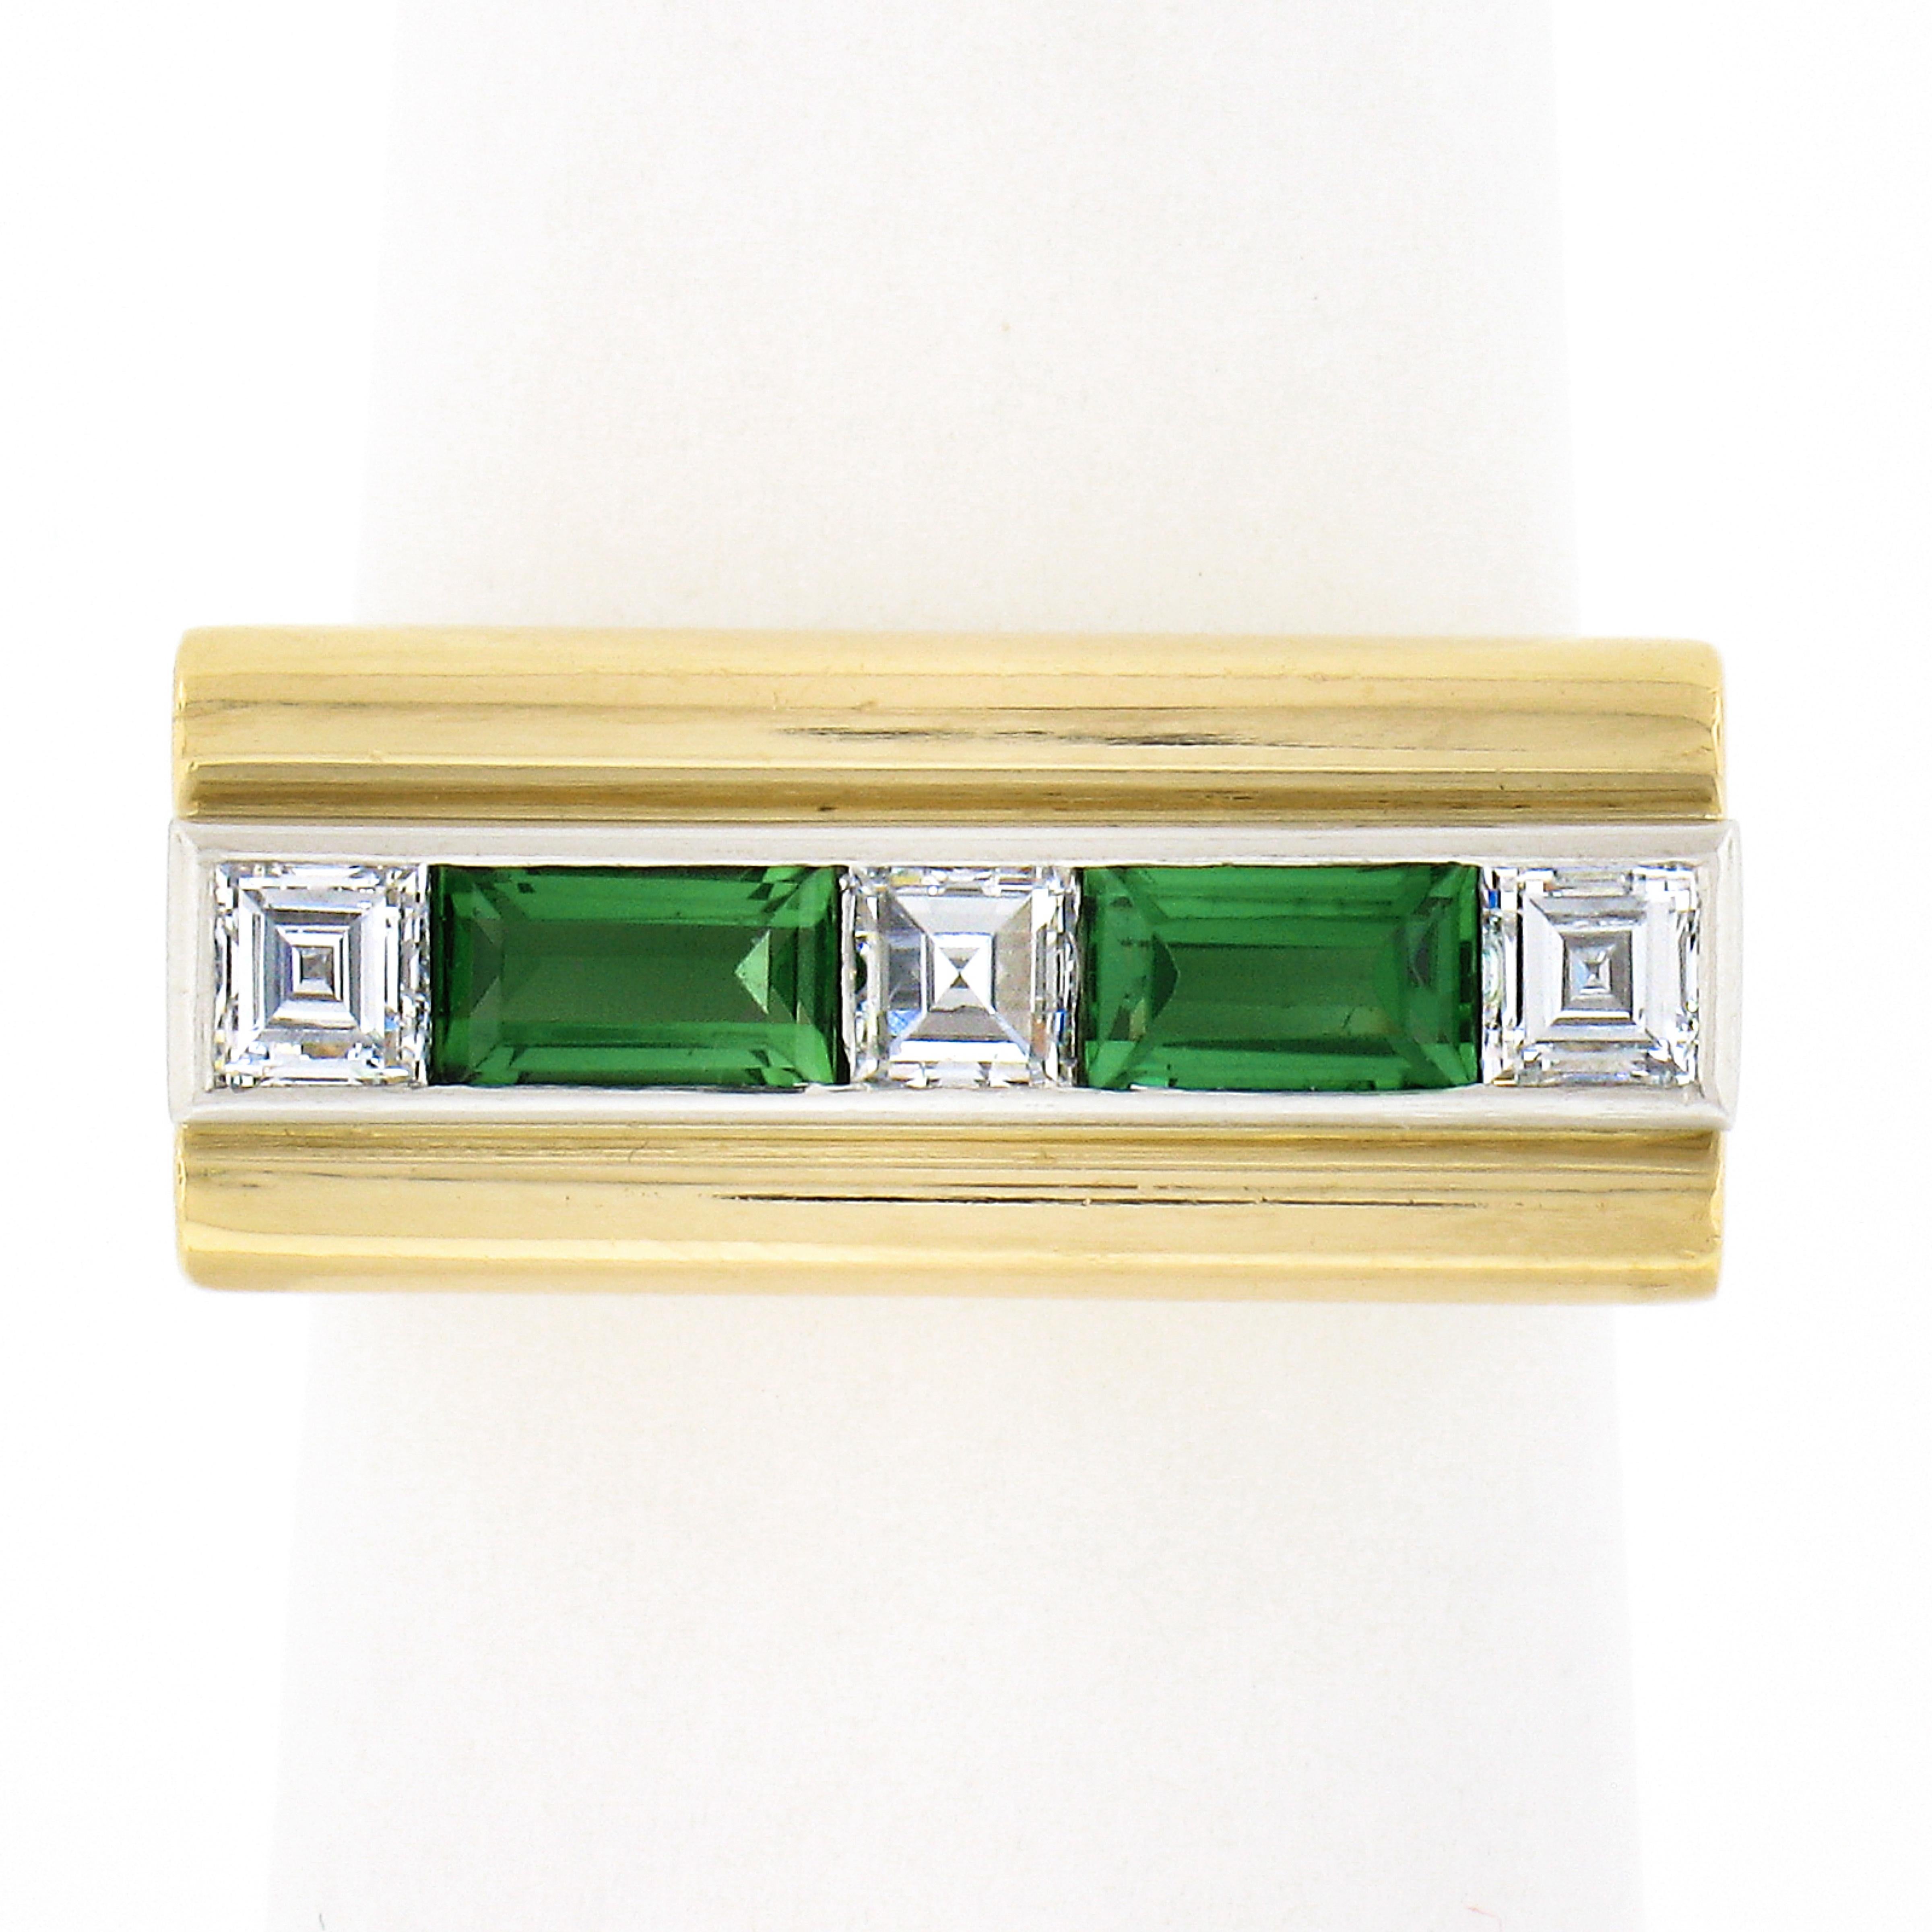 This sharp tourmaline and diamond vintage band ring is very well crafted in solid 18k yellow gold with a white gold center, and elegantly carries the fine stones across its top in a secure channel setting. The high quality tourmalines are baguette